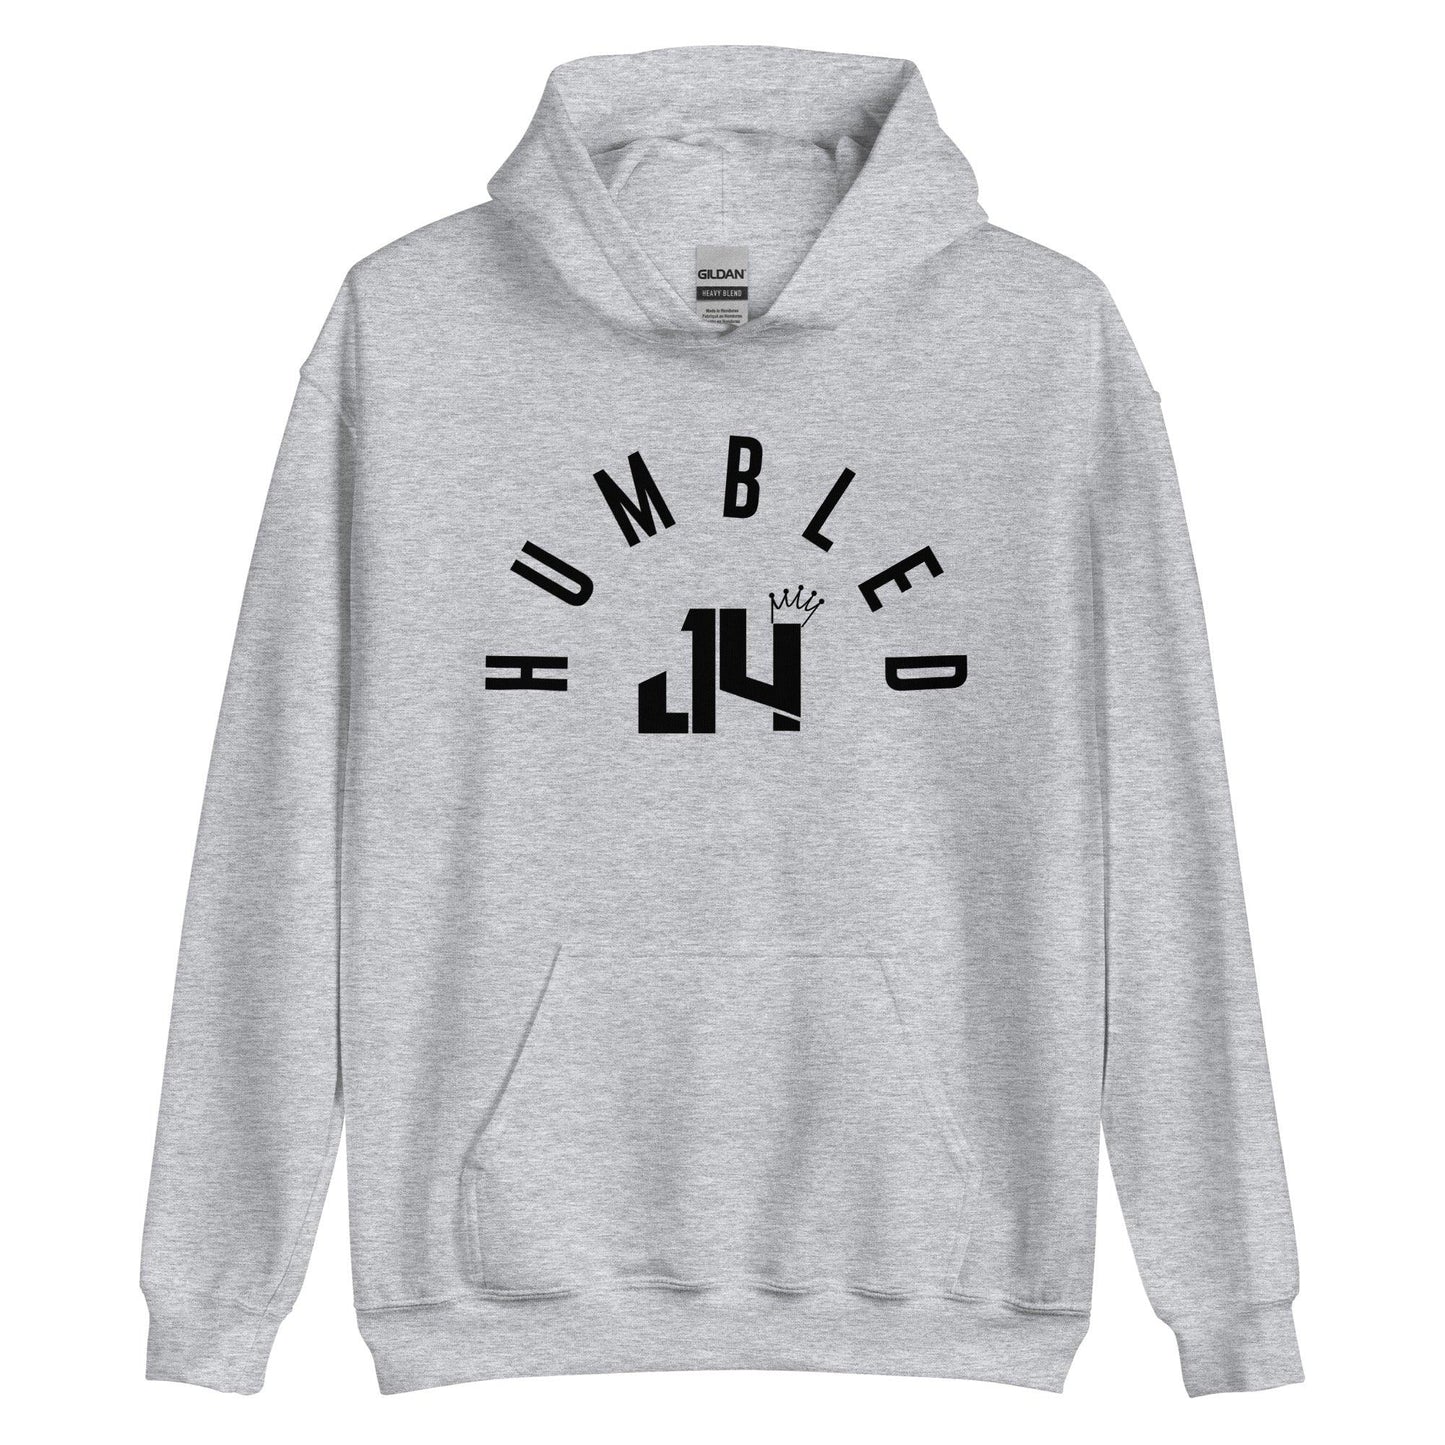 Jeff Foreman “Humbled” Hoodie - Fan Arch